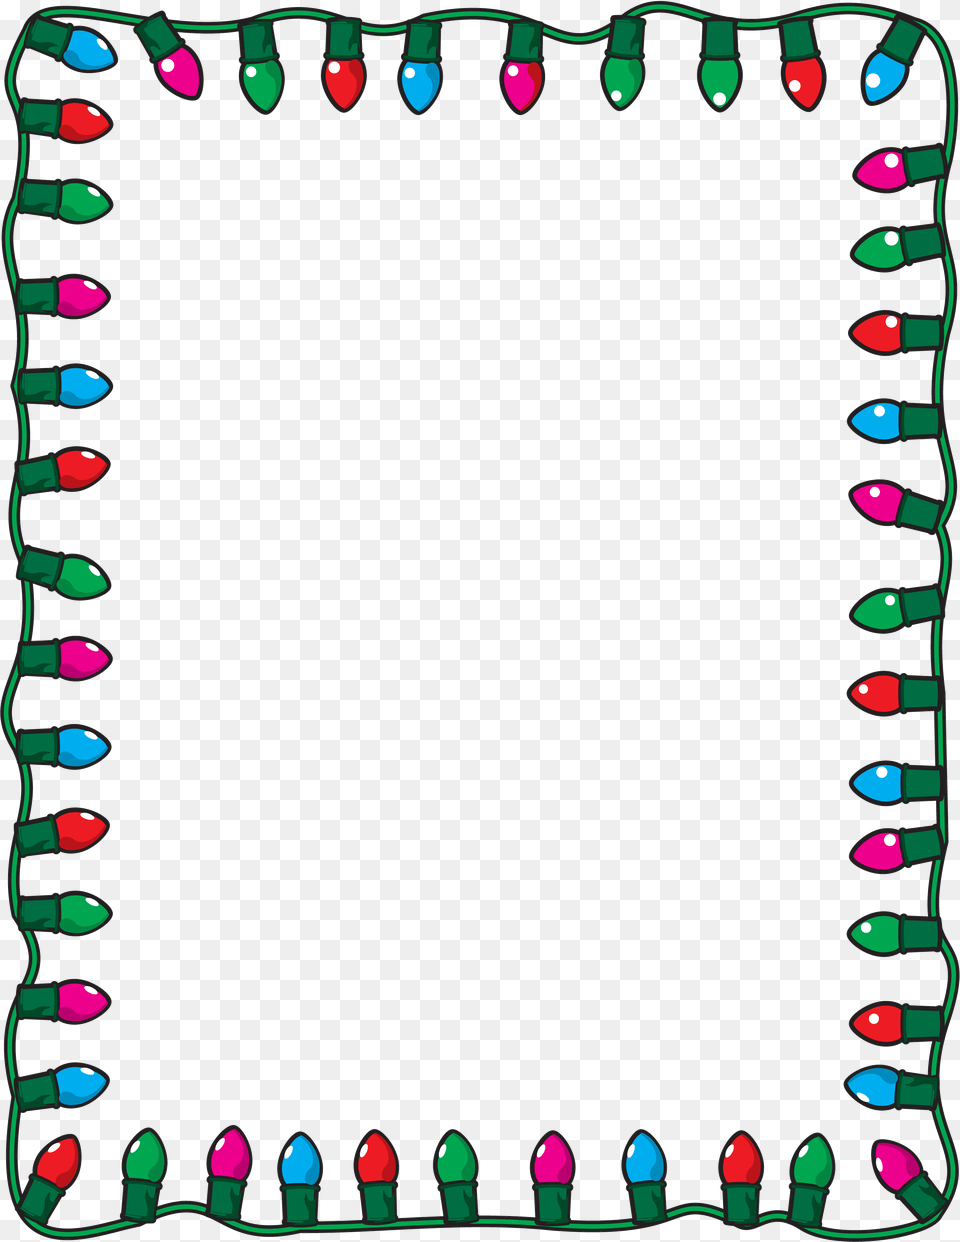 Christmas Lights Clip Art Christmas Paper Border, Cosmetics, Lipstick, Accessories, Glasses Png Image